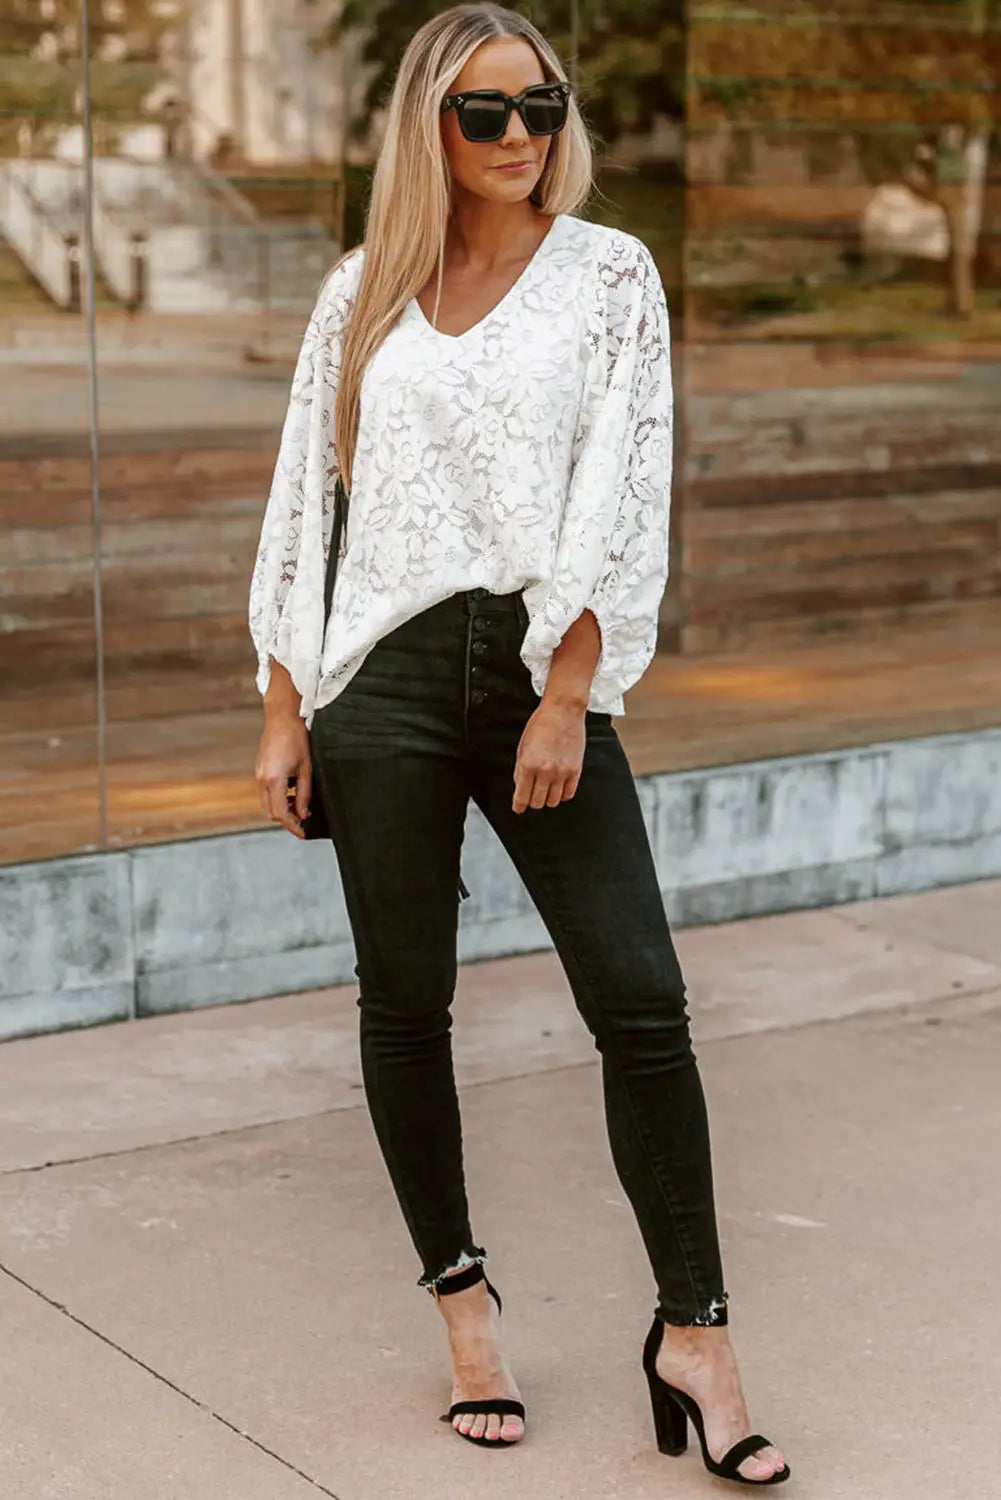 White floral lace crochet loose fit v neck top - long sleeve tops